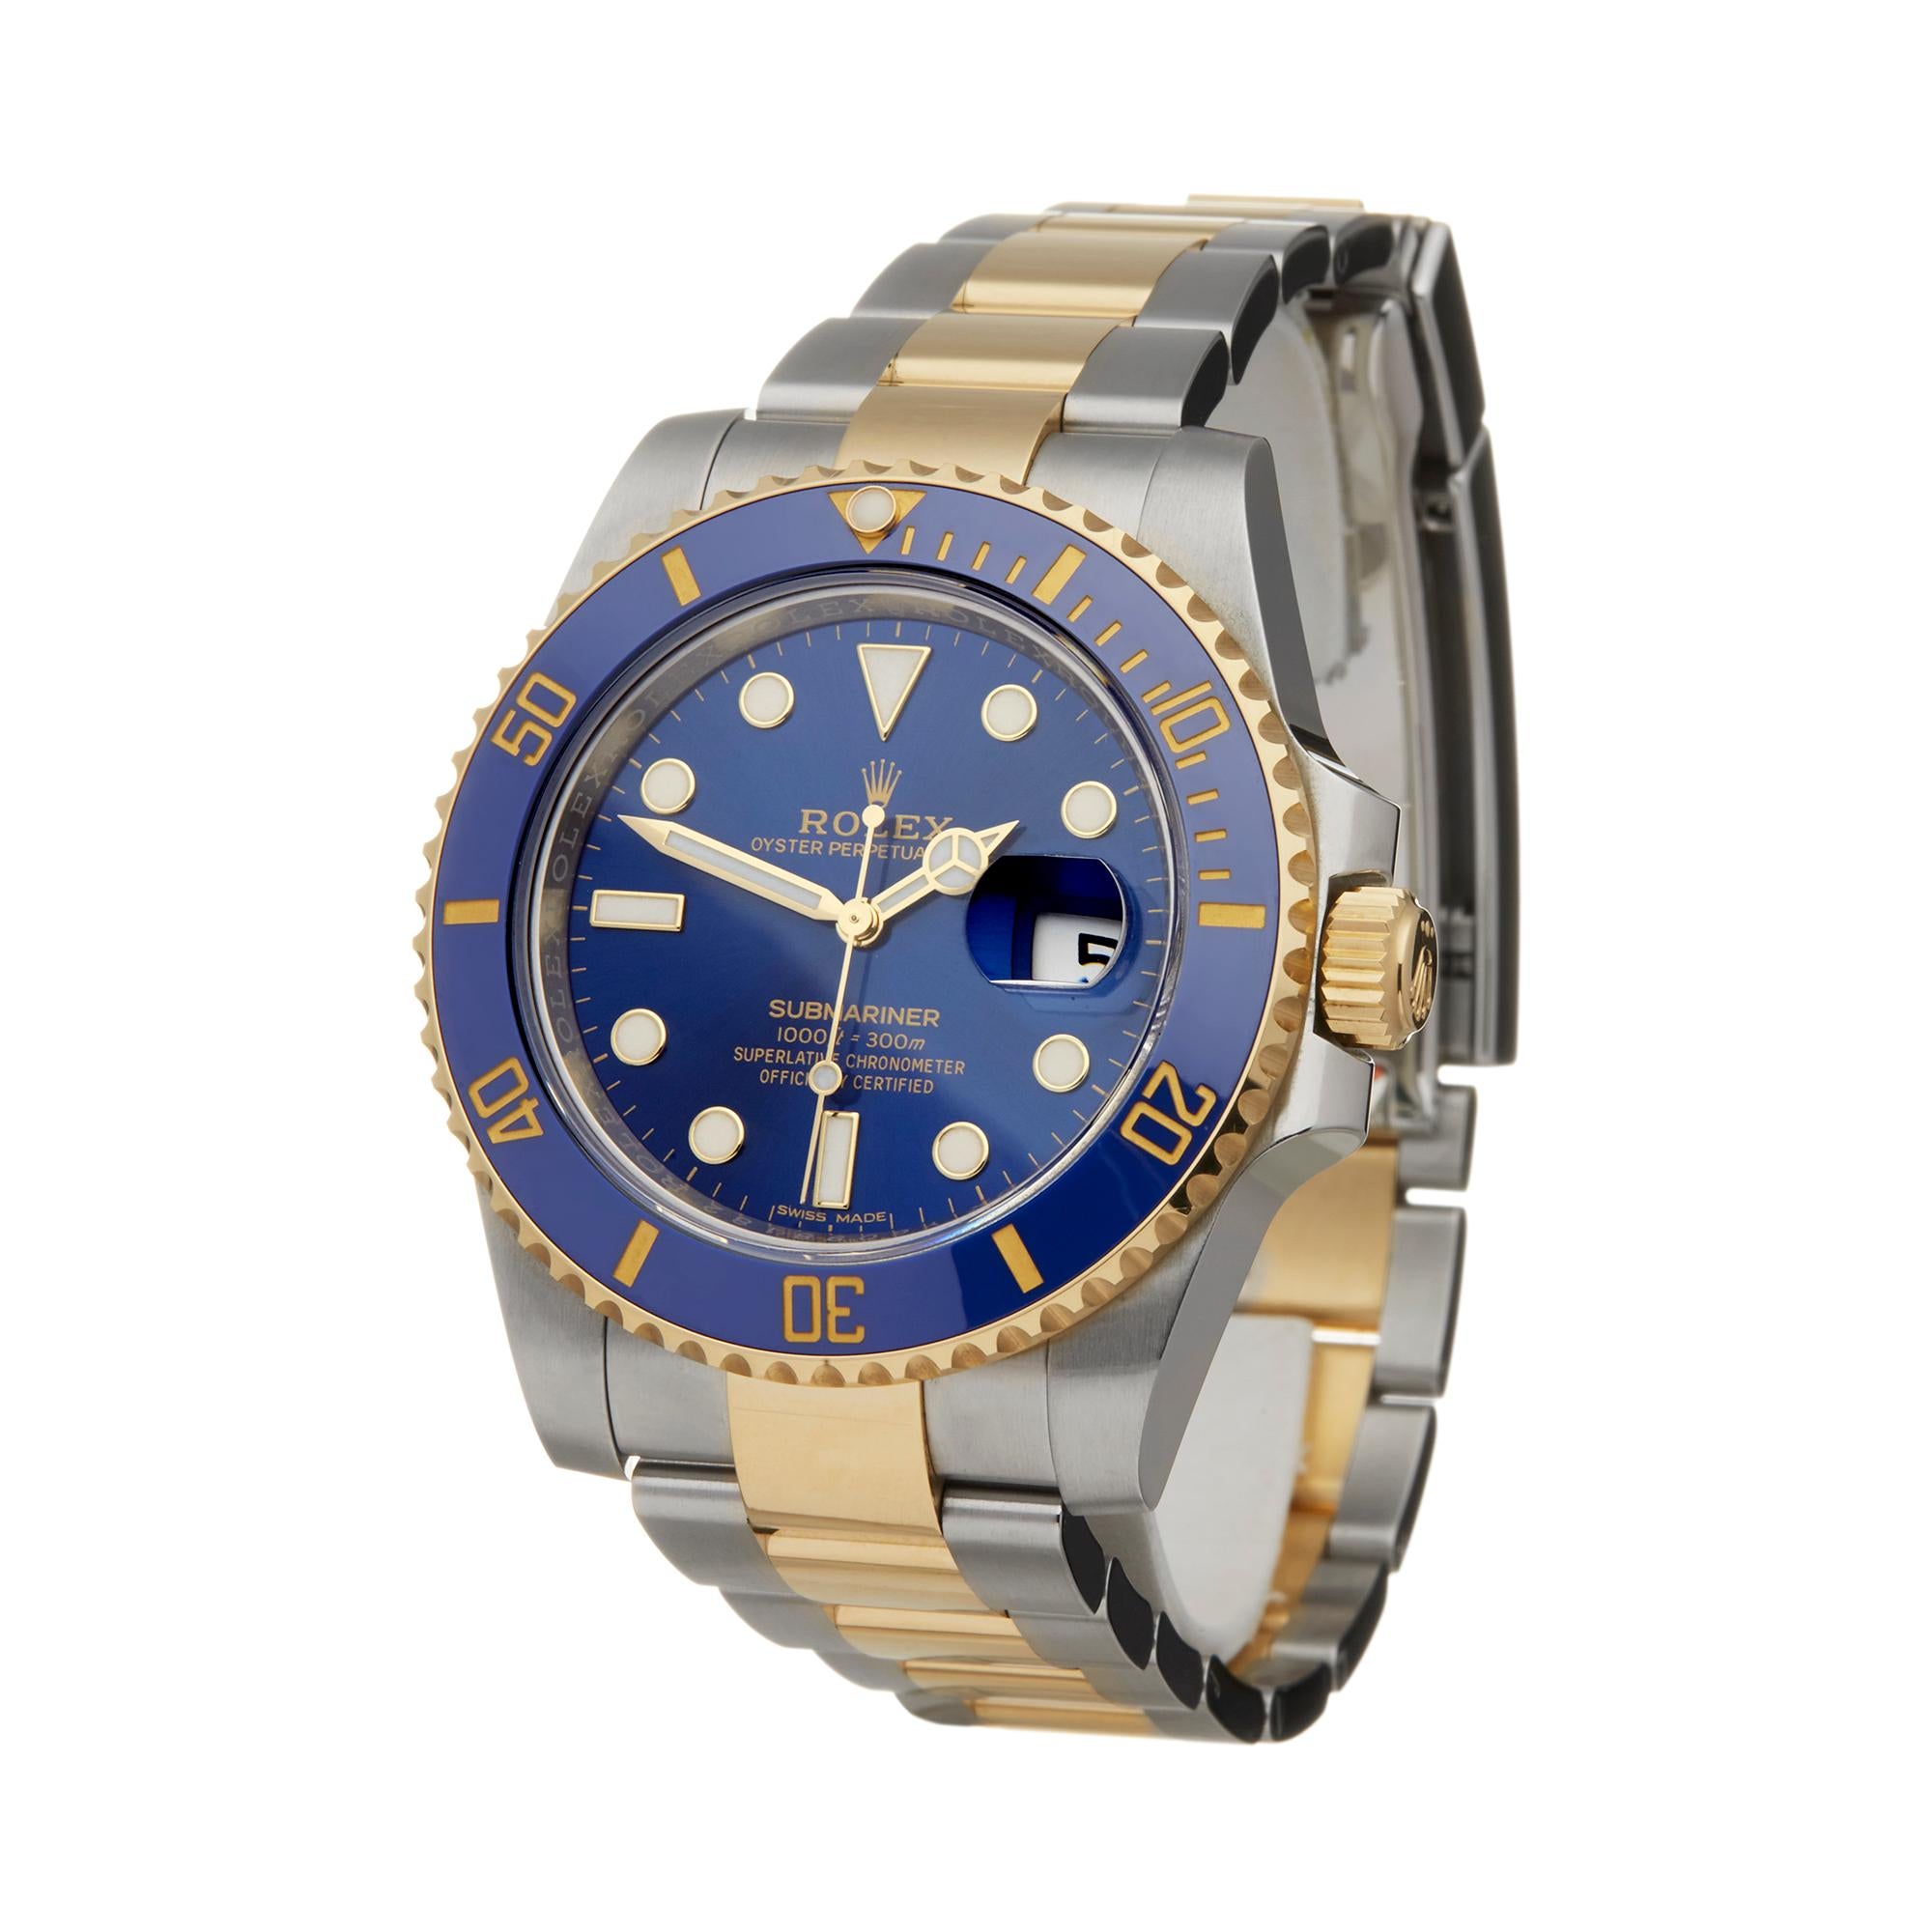 Reference: W5996
Manufacturer: Rolex
Model: Submariner
Model Reference: 116613LB
Date: 8th December 2016
Gender: Men's
Box and Papers: Box, Manuals and Guarantee
Dial: Blue
Glass: Sapphire Crystal
Movement: Automatic
Water Resistance: To